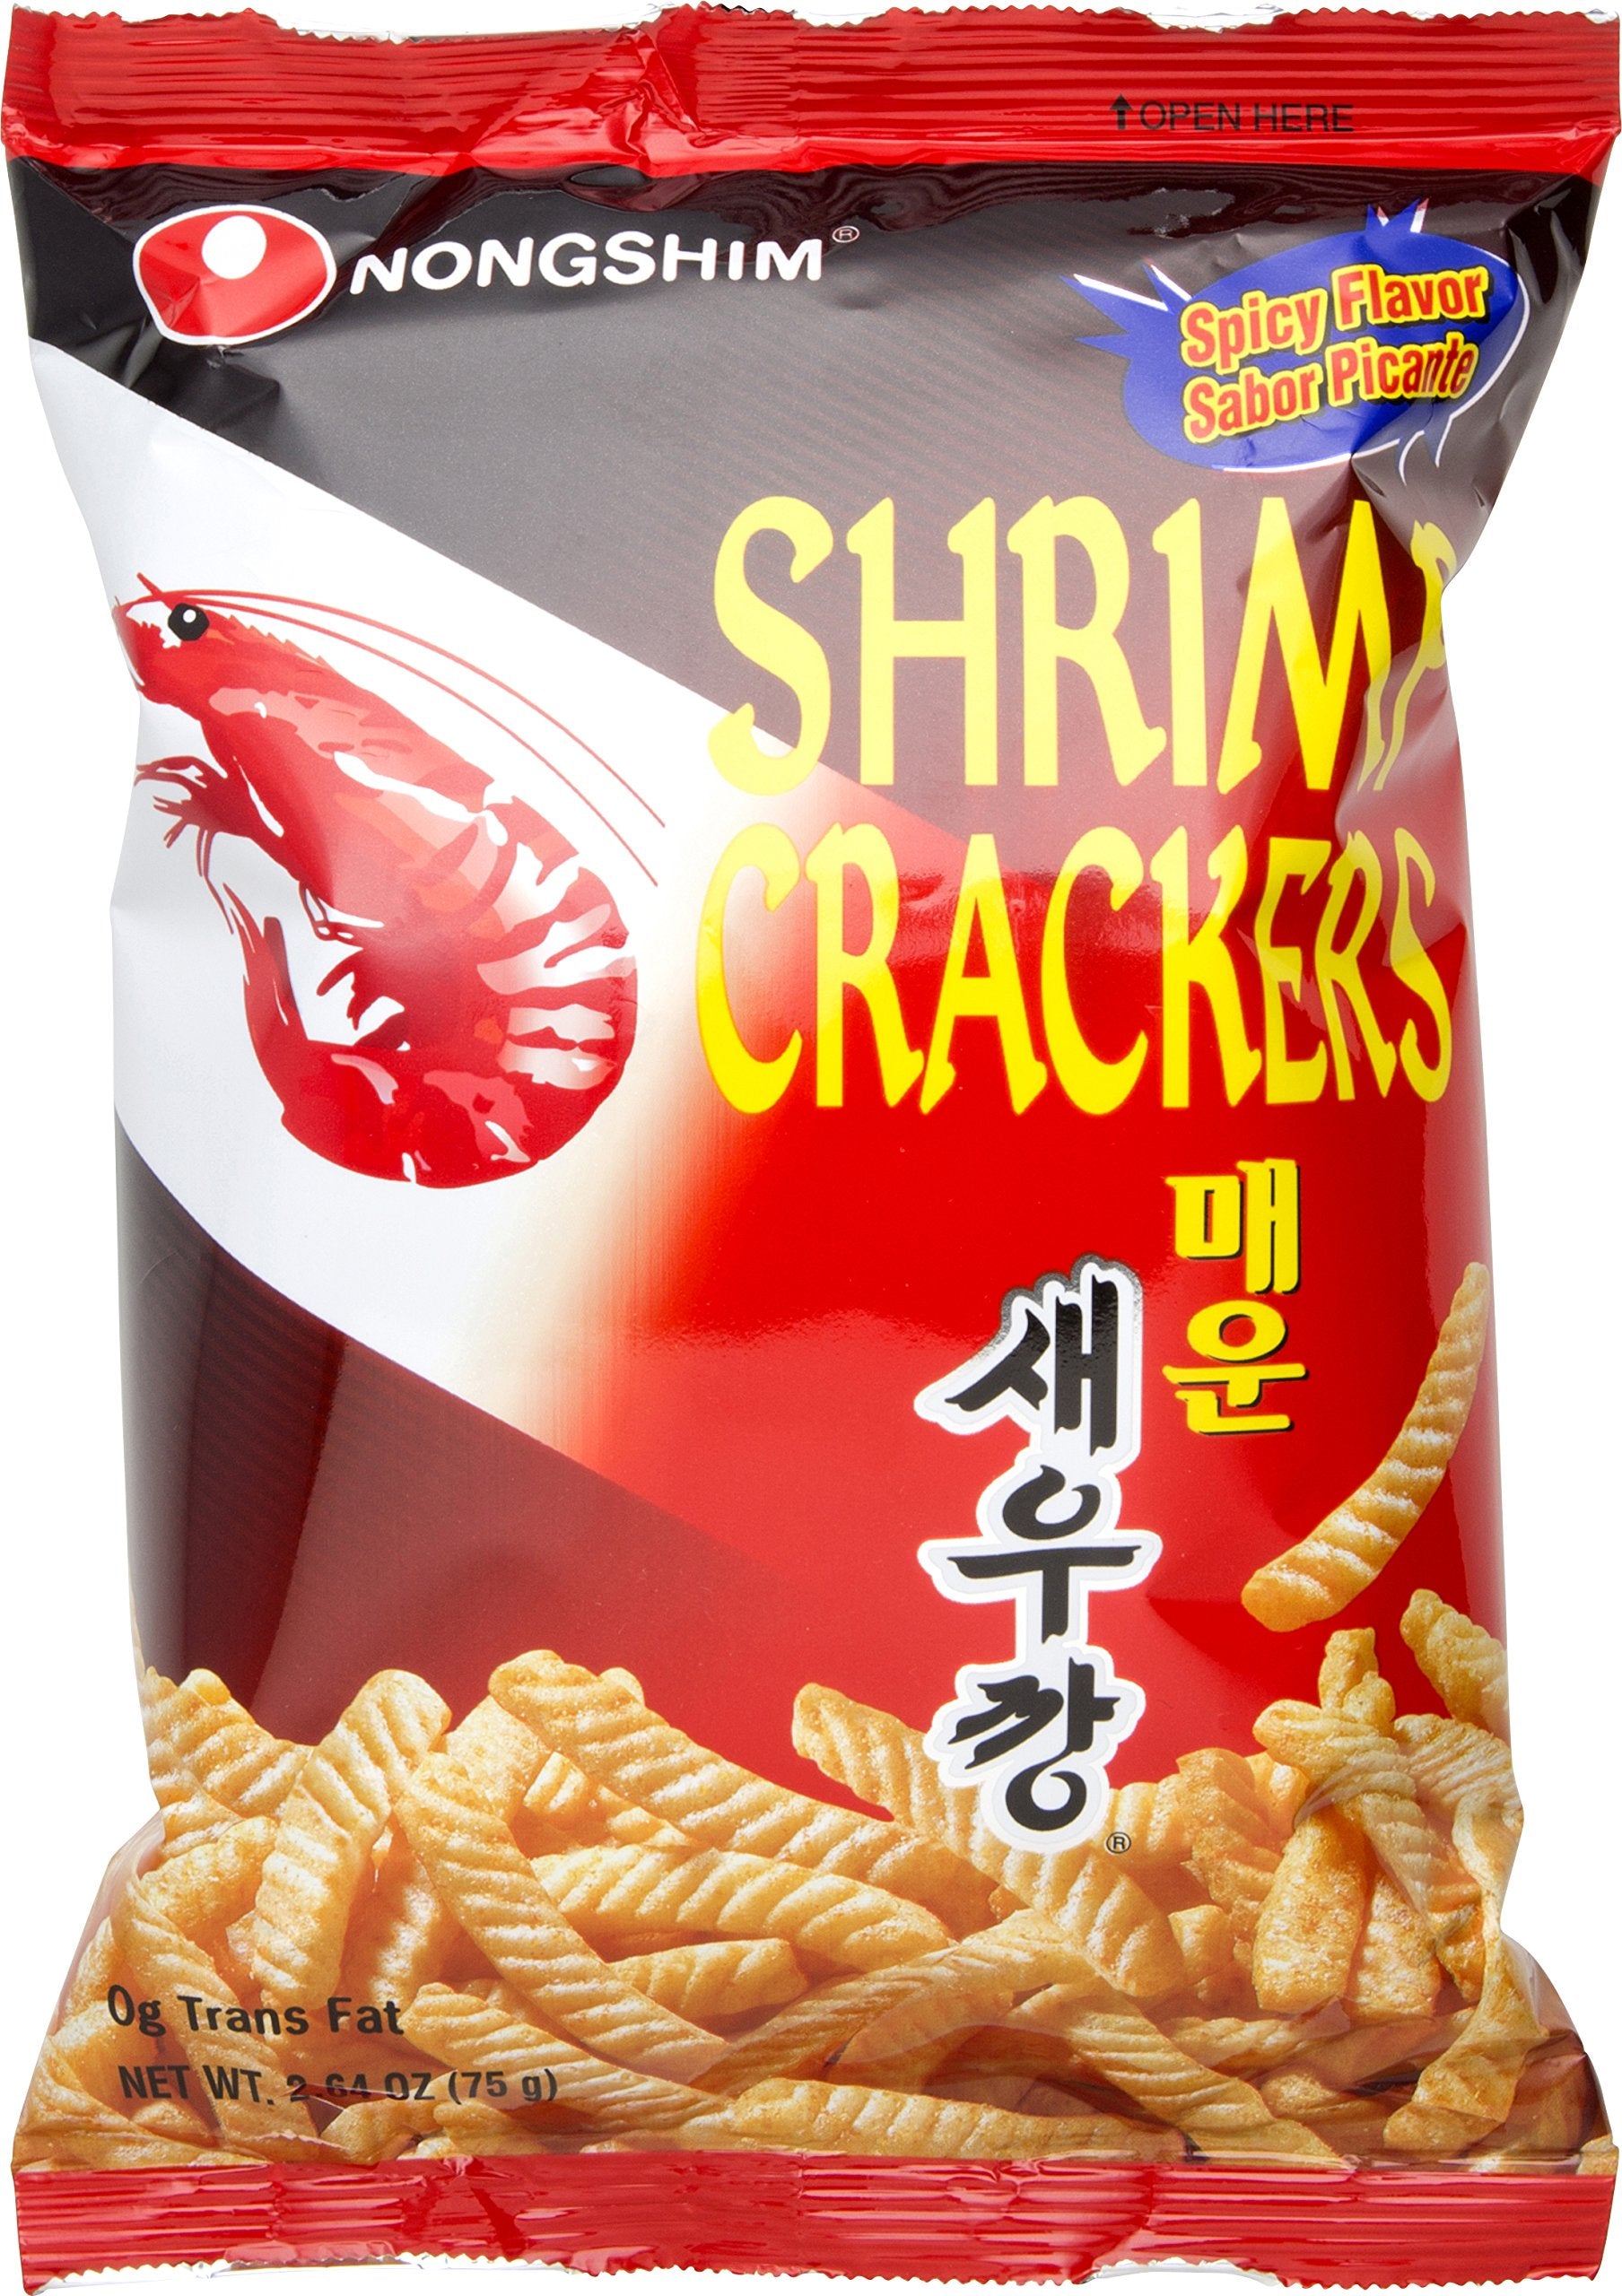 Hot and Spicy Shrimp Crackers 75g by Nongshim